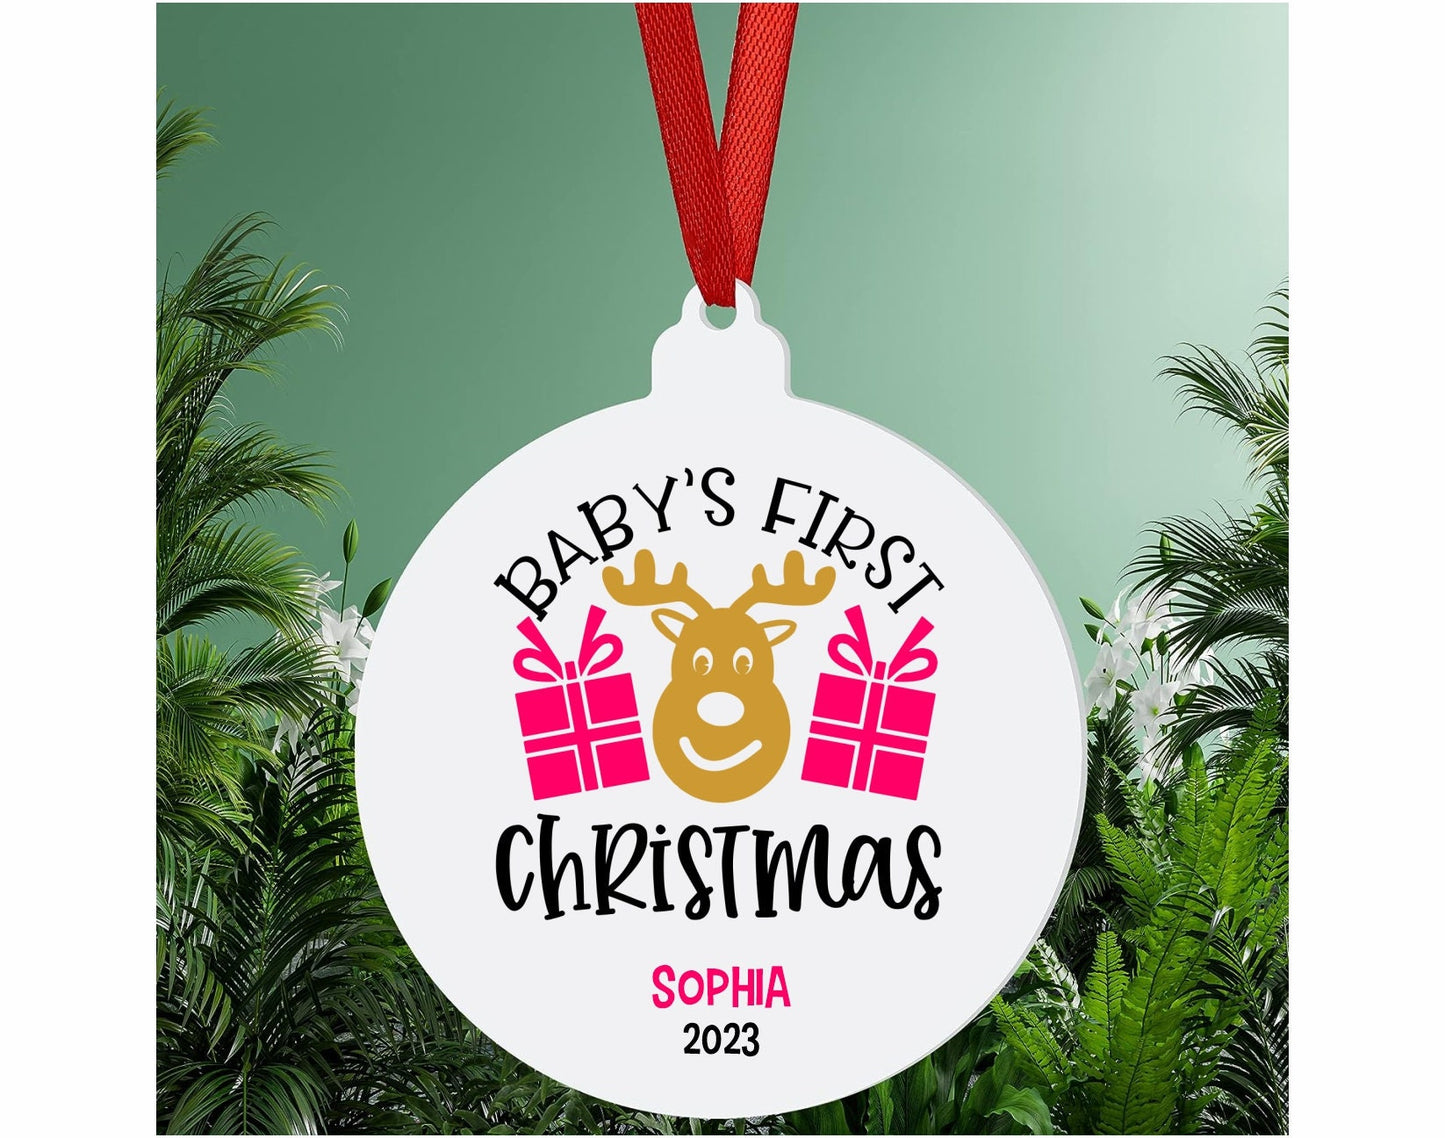 Personalized Baby's First Christmas Ornament 2023